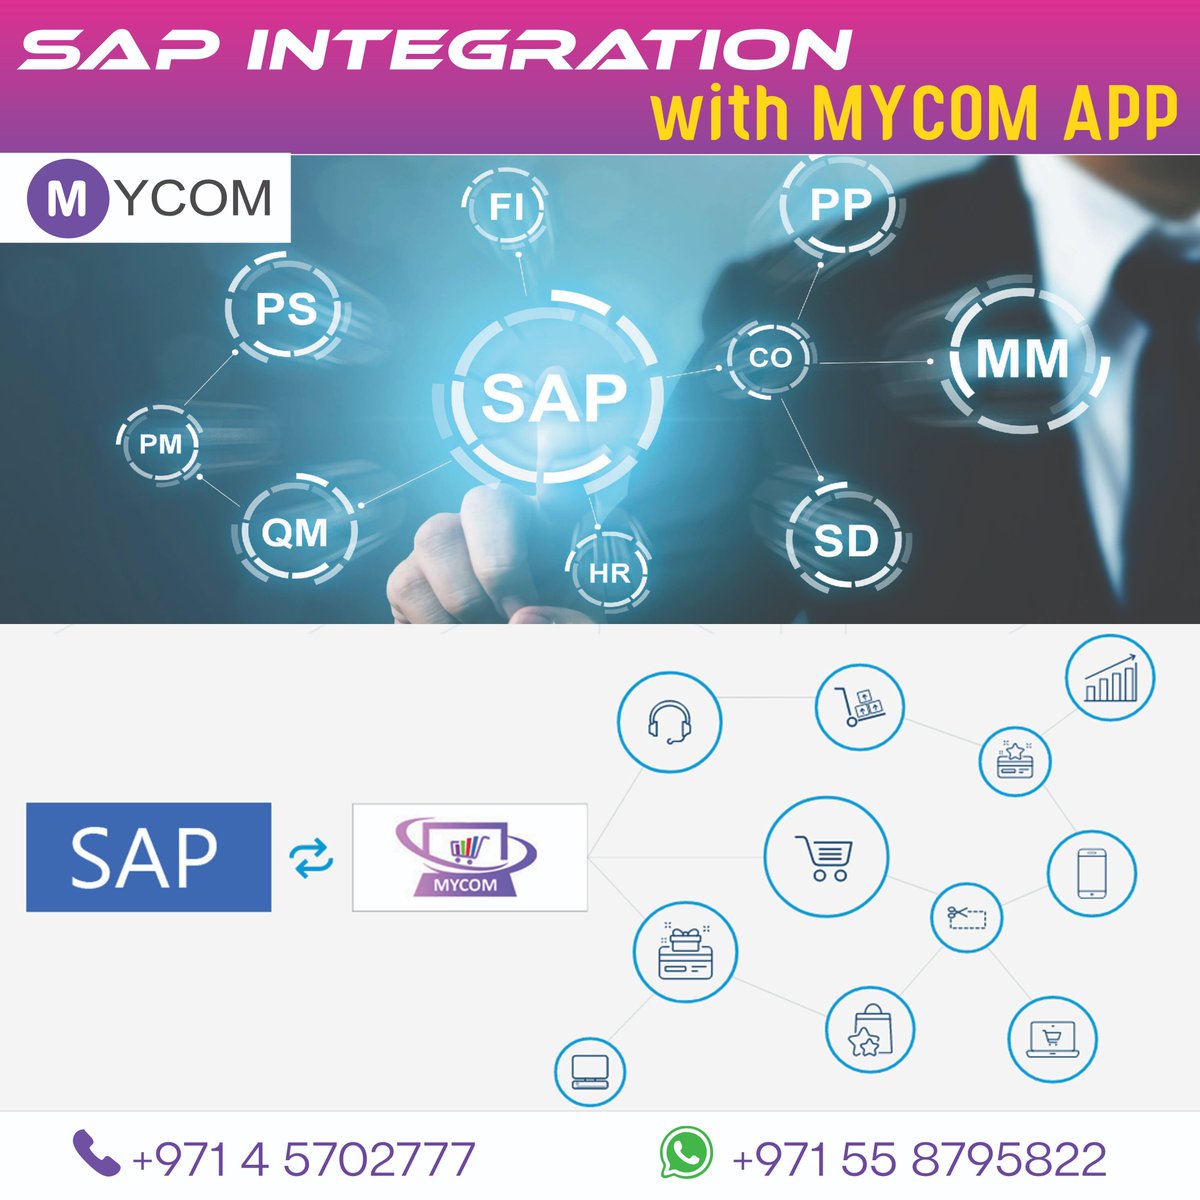 MYCOM TECHNOLOGIES are retail experts who leverage SAP ERP to help retailers optimize their operations, capture detailed customer insights, and innovate for future growth. #sapintegration #mycomtech #mycomtechapp #Dubai